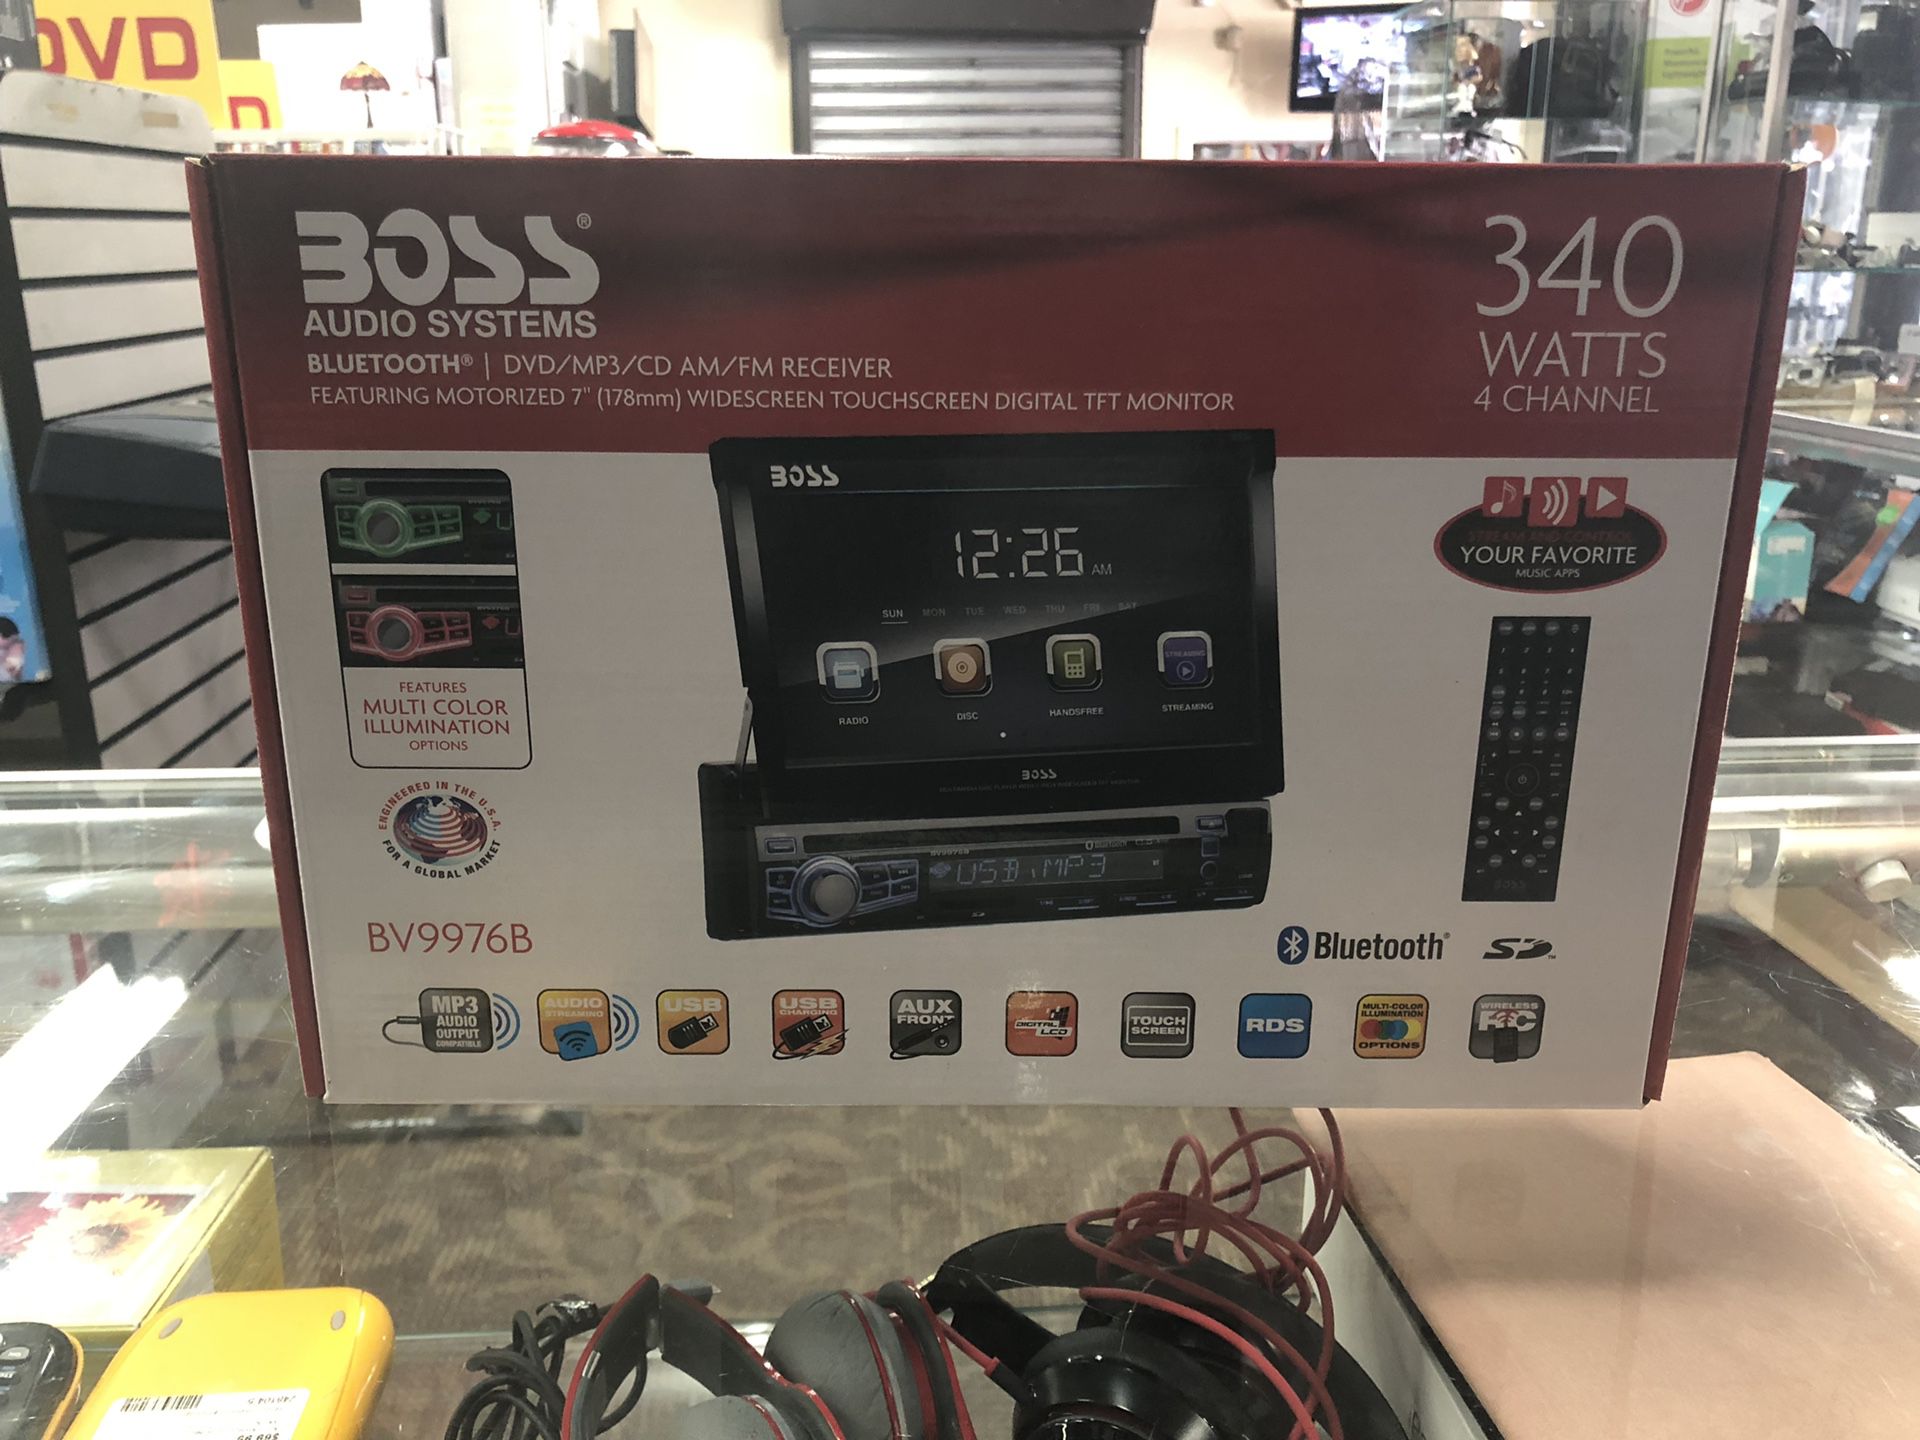 BOSS AUDIO CAR CD PLAYER!! BRAND NEW IN BOX!! Negotiable